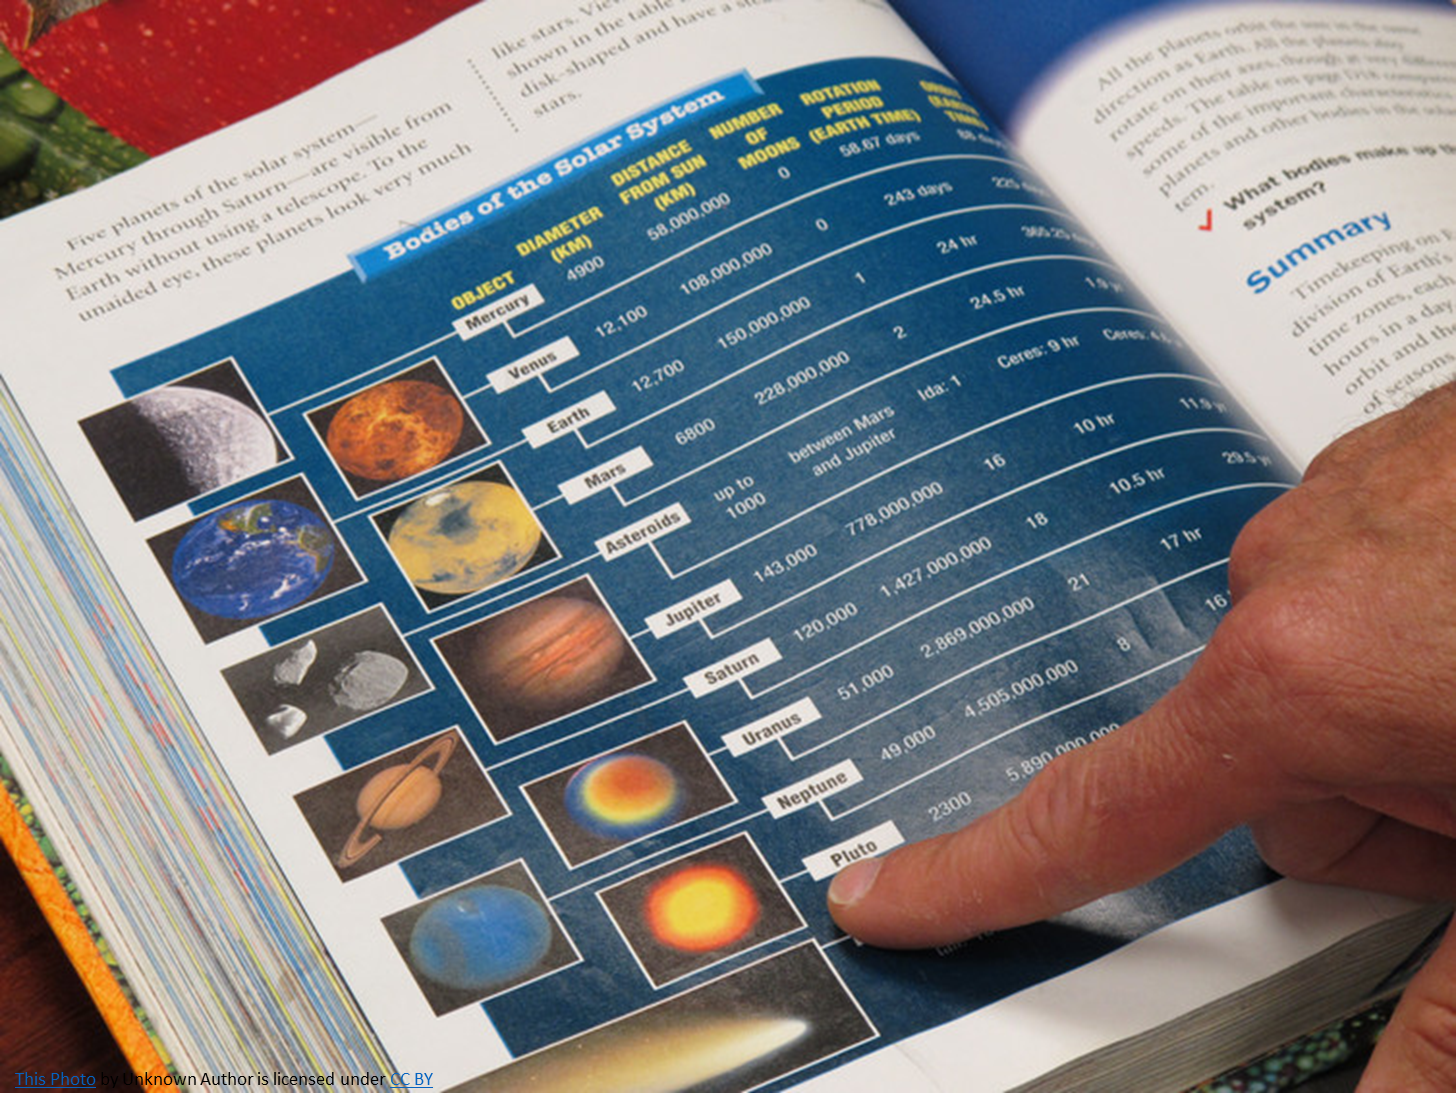 a textbook page shows a chart of the bodies of the solar system with photos, names and facts